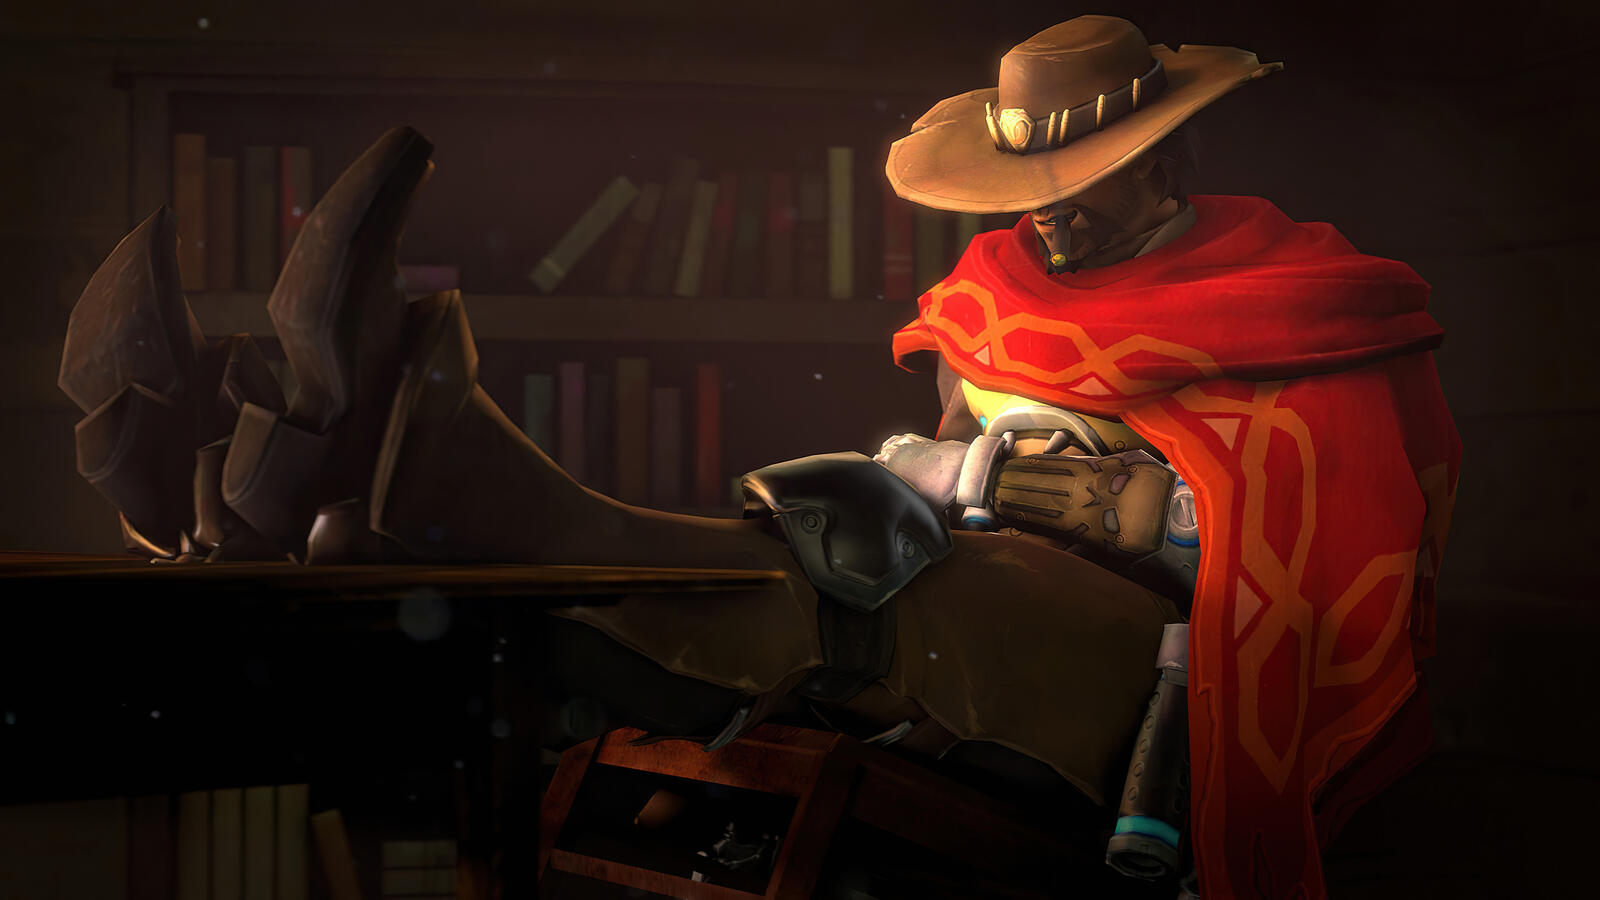 Wallpapers mccree overwatch overview games on the desktop